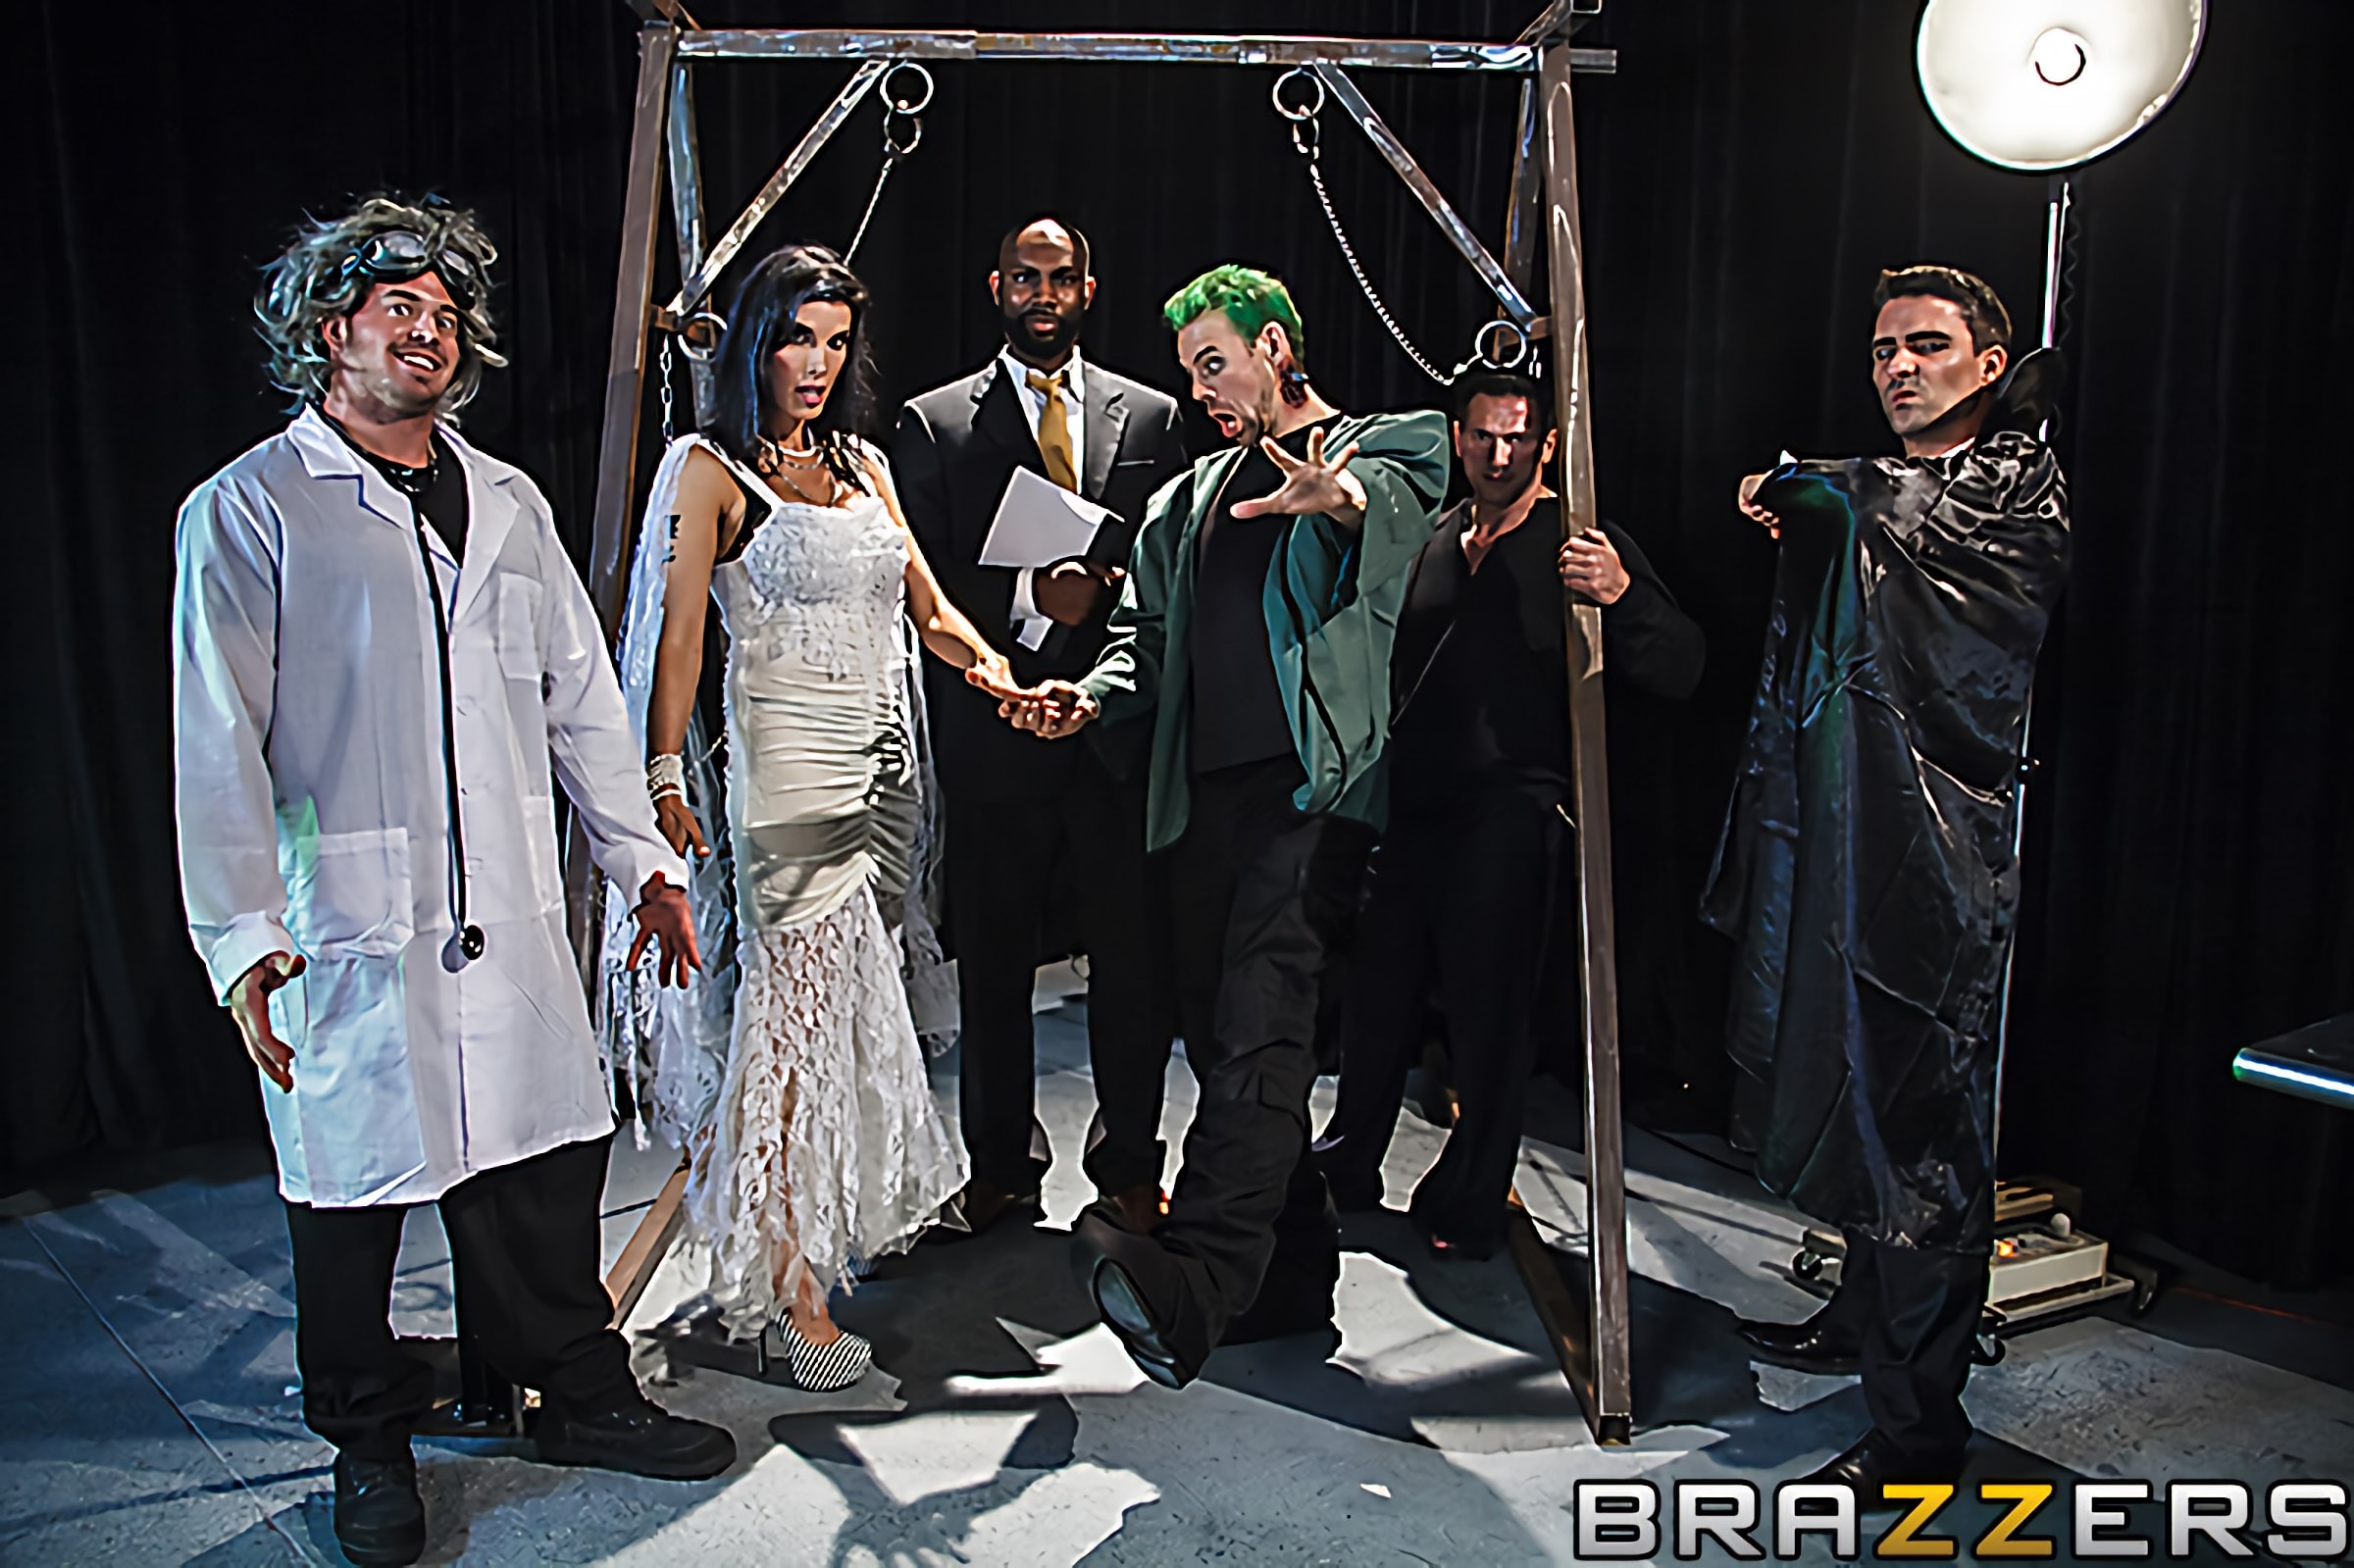 Brazzers 'Bride of Frankendick' starring Shay Sights (Photo 3)